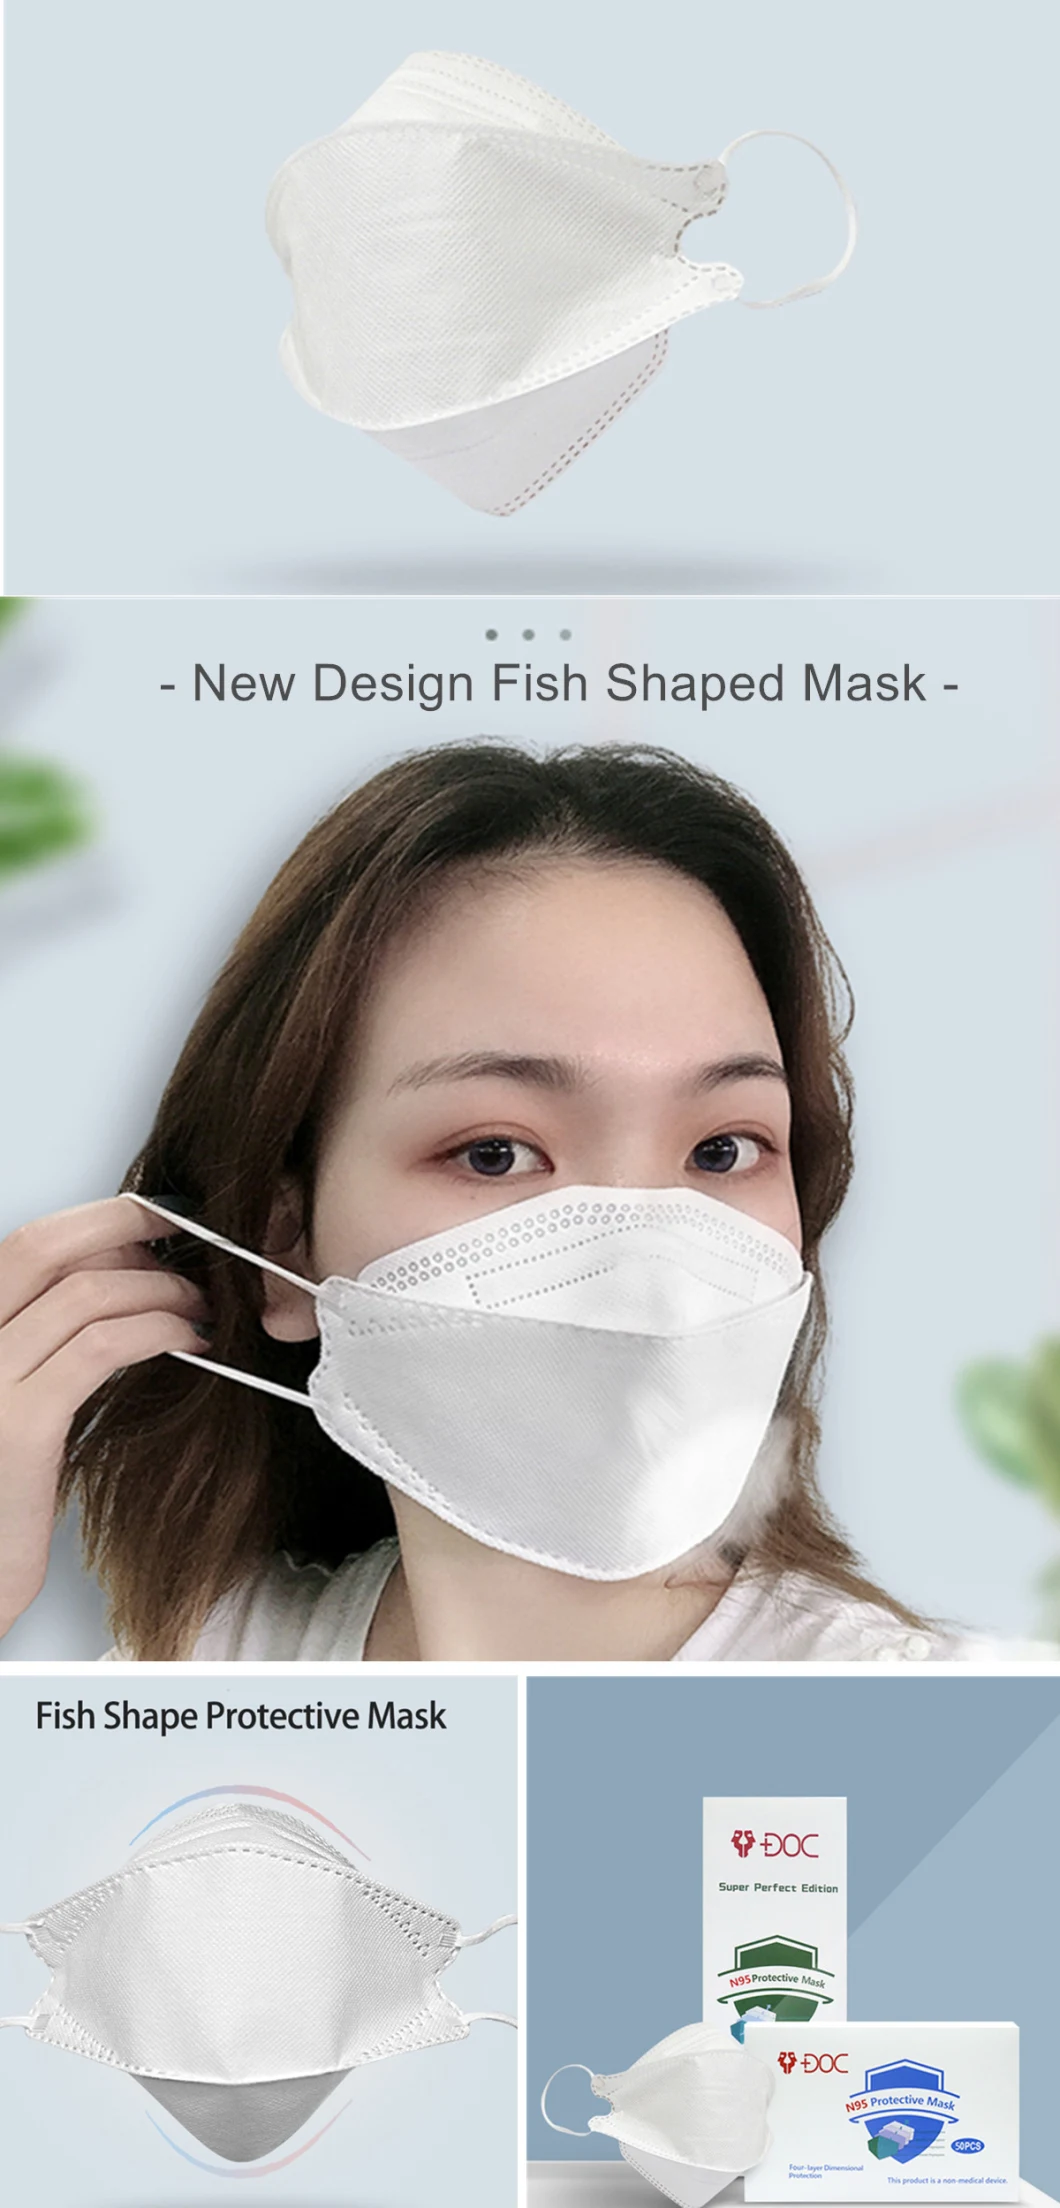 4layer Face Mask Disposable Anti Fog Dust FFP3 Mask Manufacturers with Ce Certificate